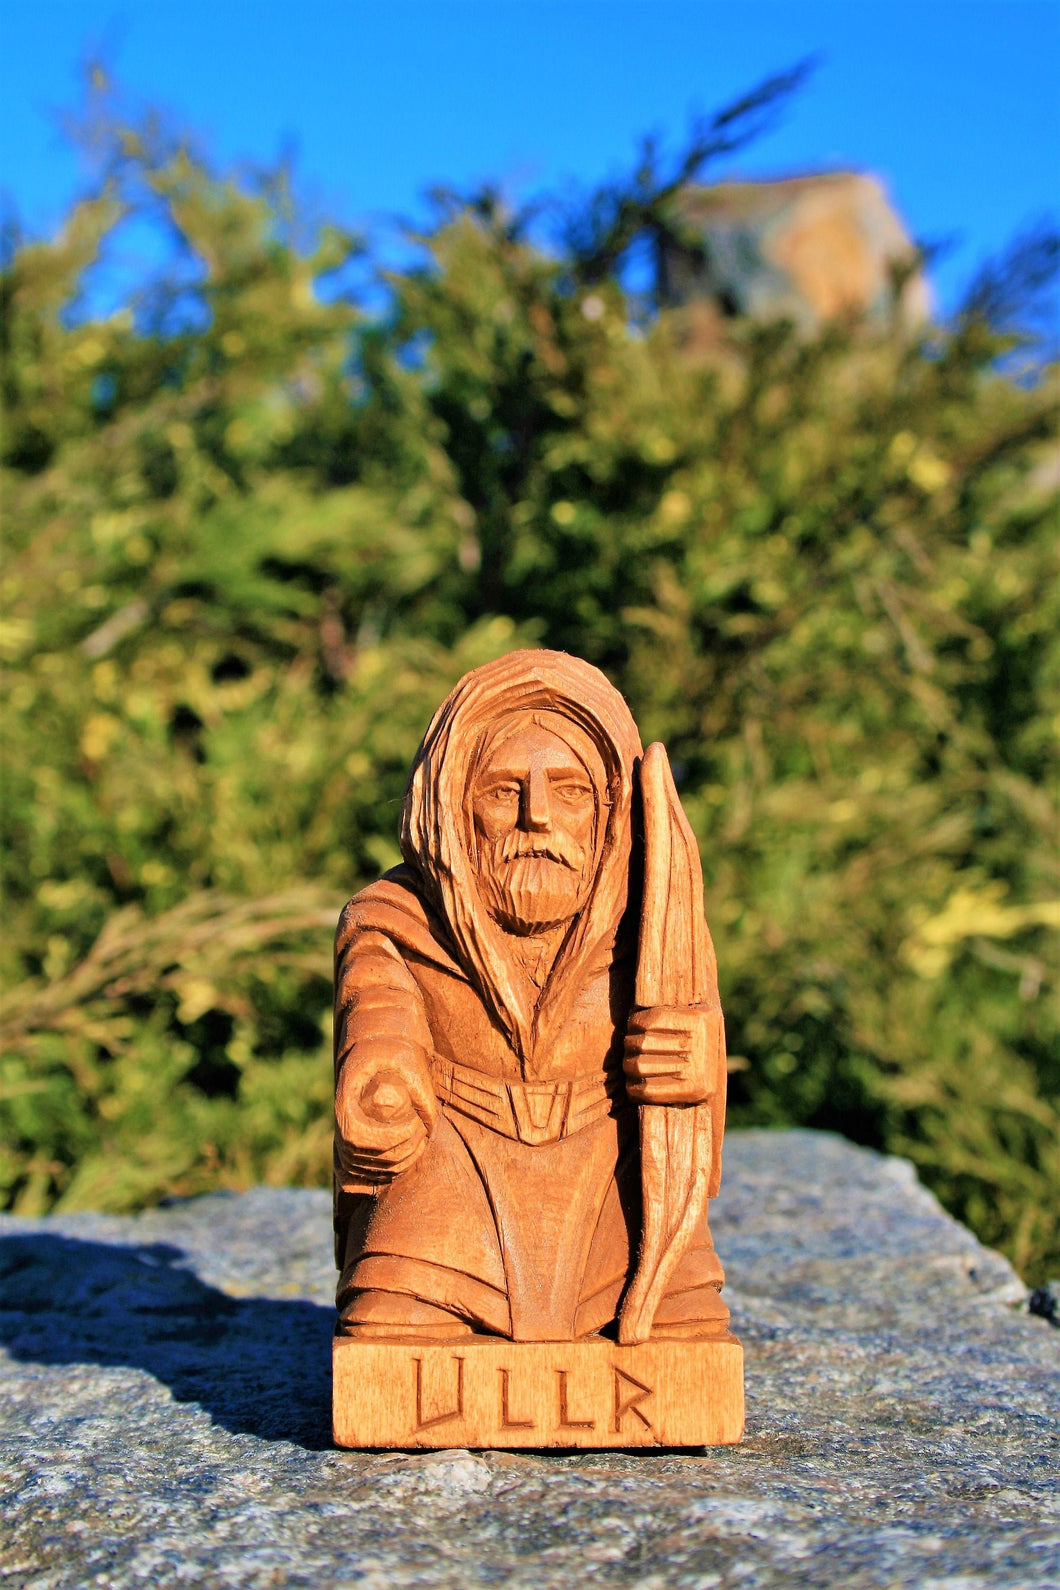 Ullr norse god, wood carving statue, witchy gifts, pagan decor, wood sculpture, gothic home decor